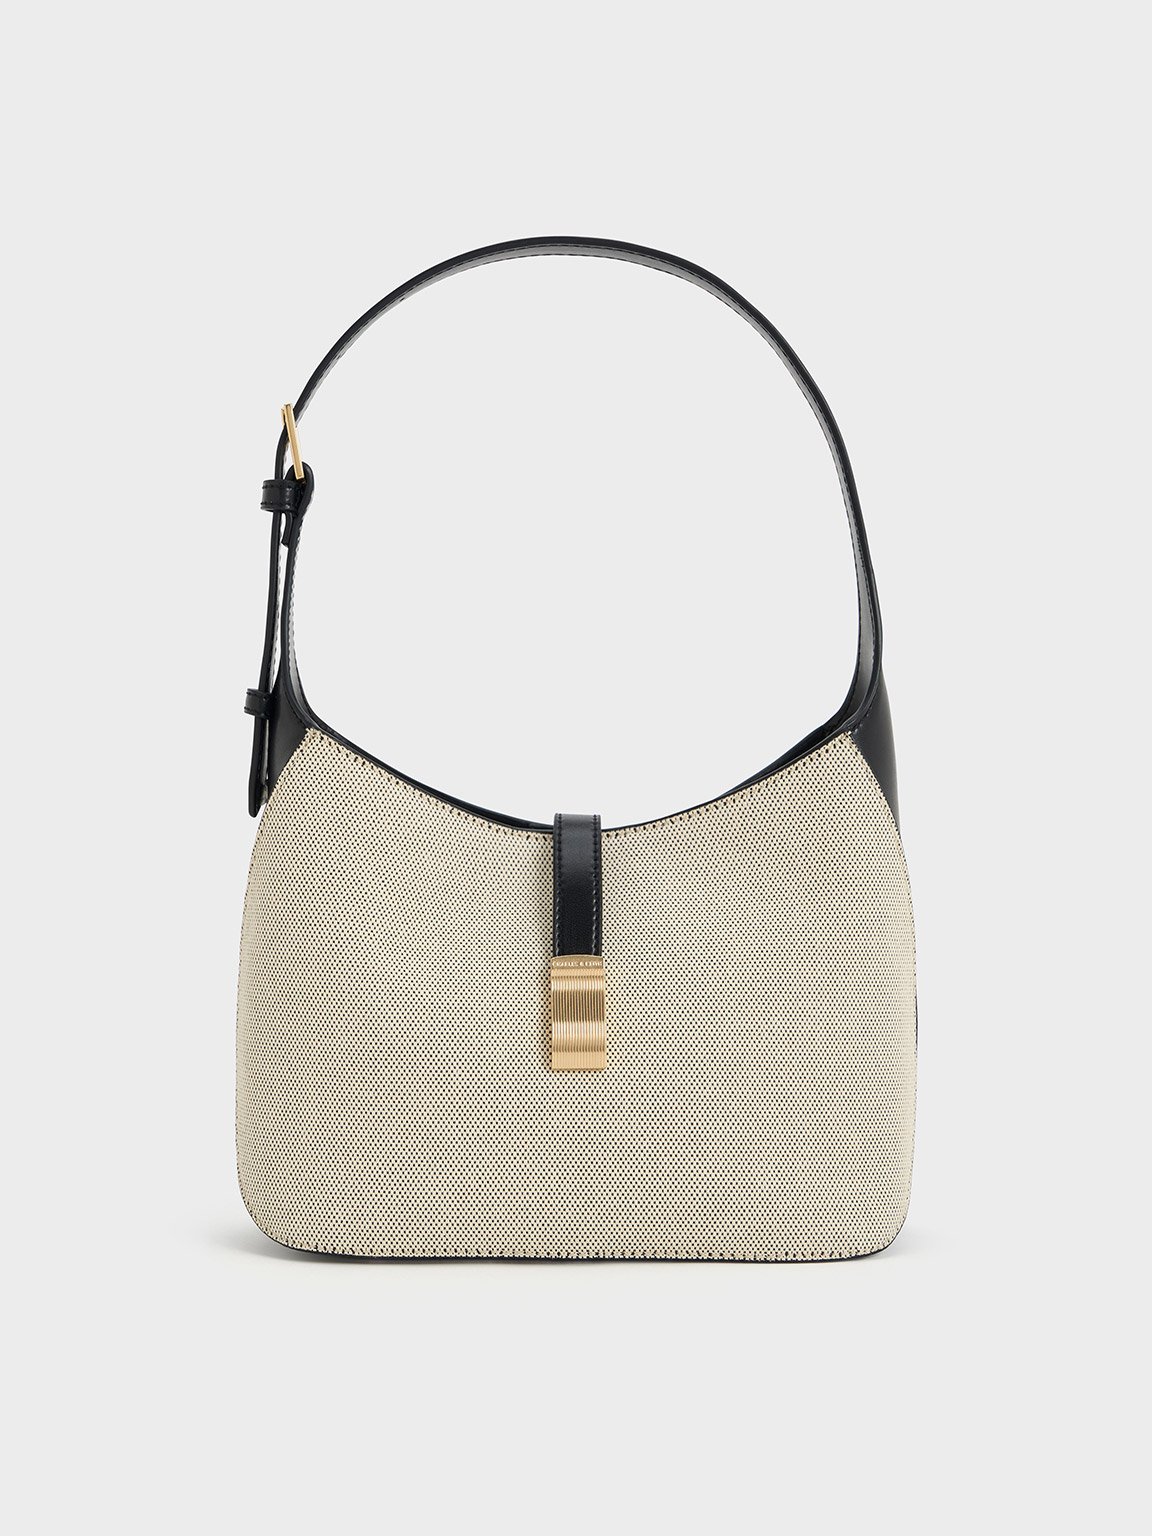 Charles & Keith Wisteria Canvas Belted Shoulder Bag In Neutral